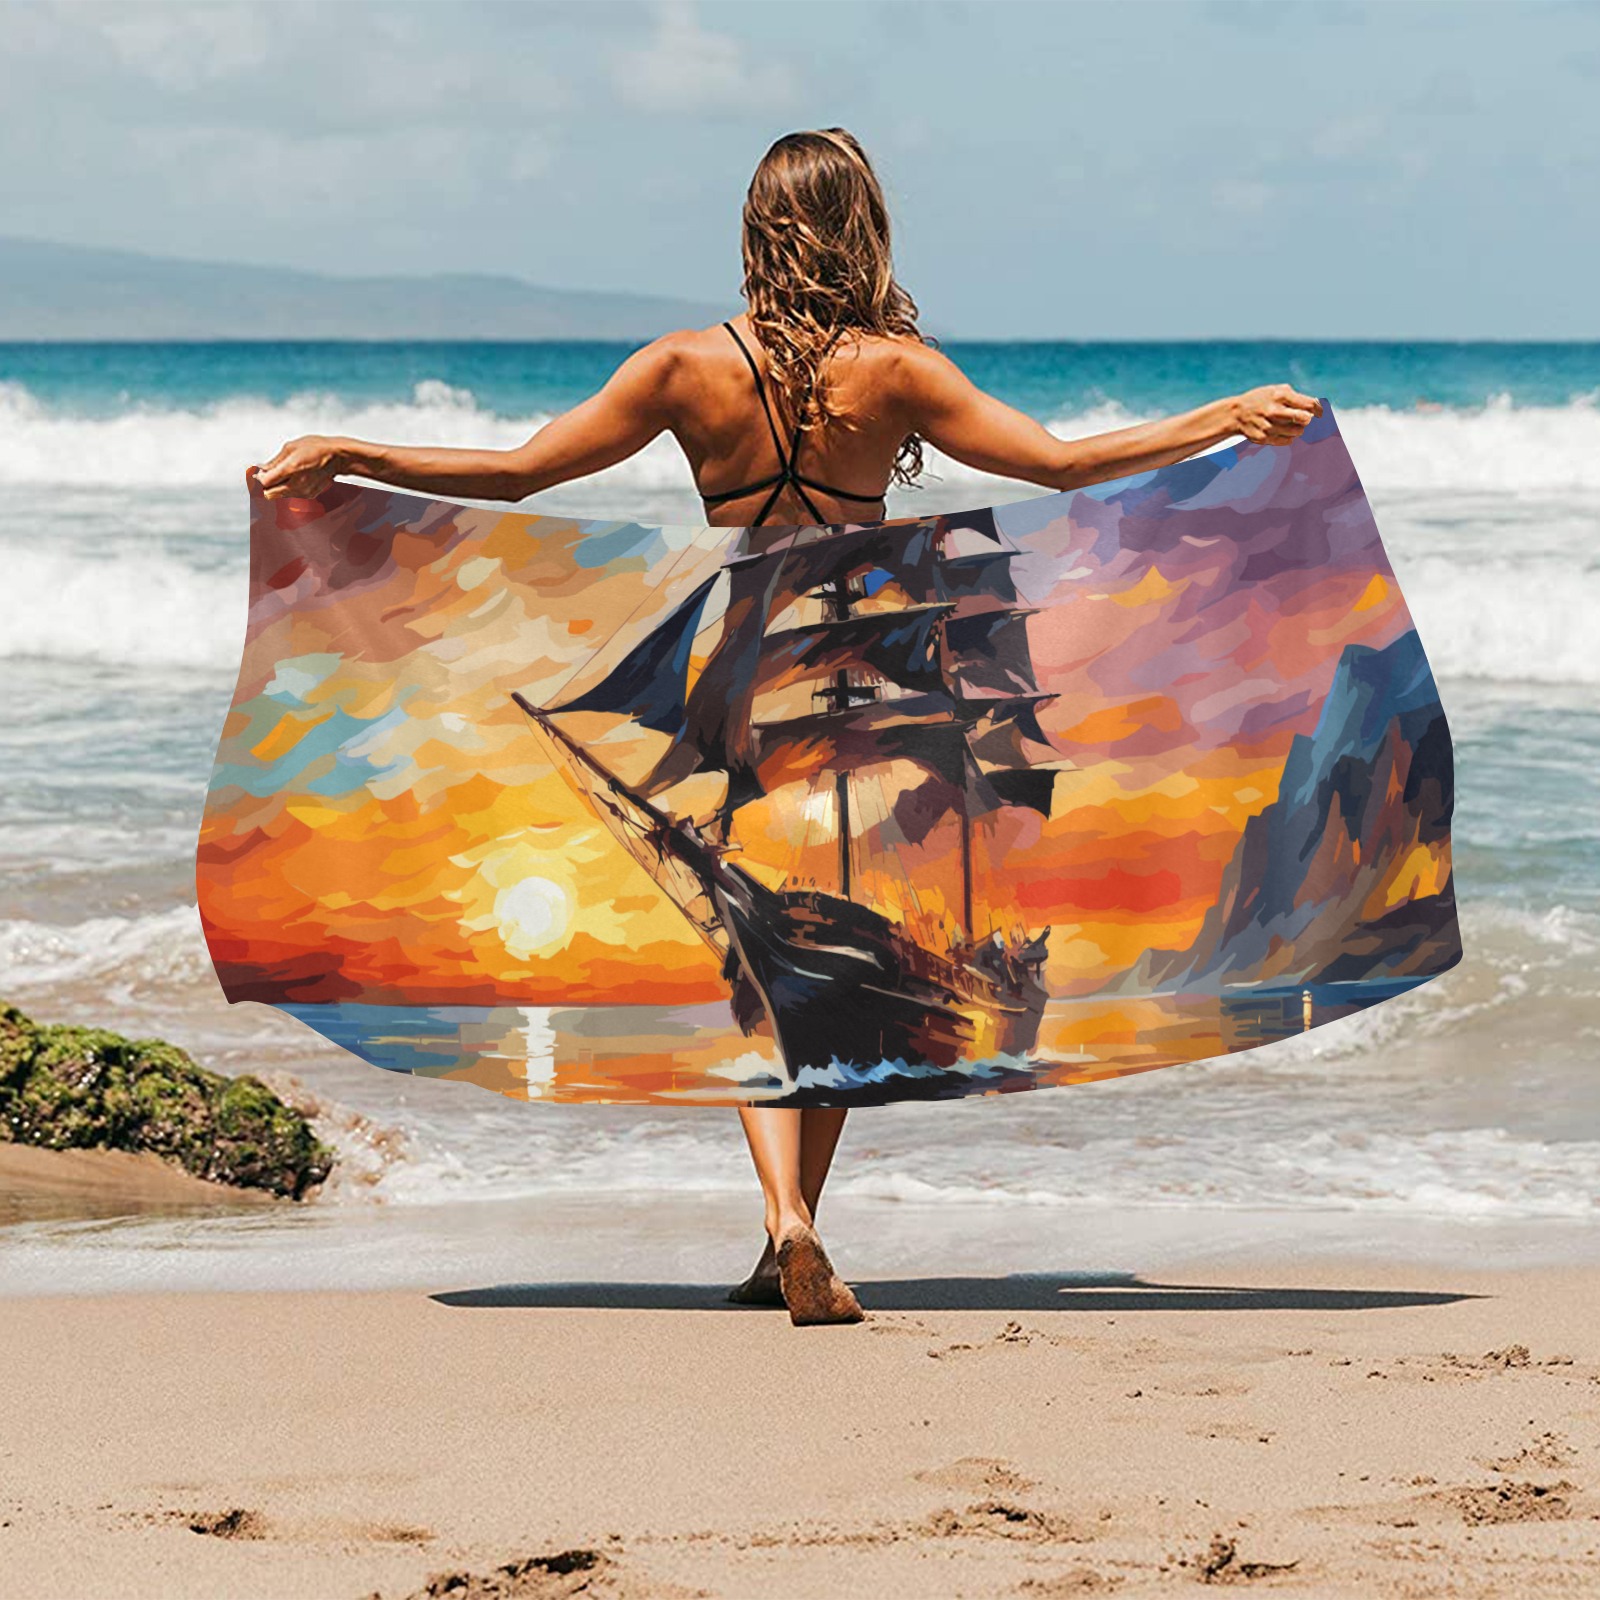 Cool pirate ship by the island at dramatic sunset. Beach Towel 32"x 71"